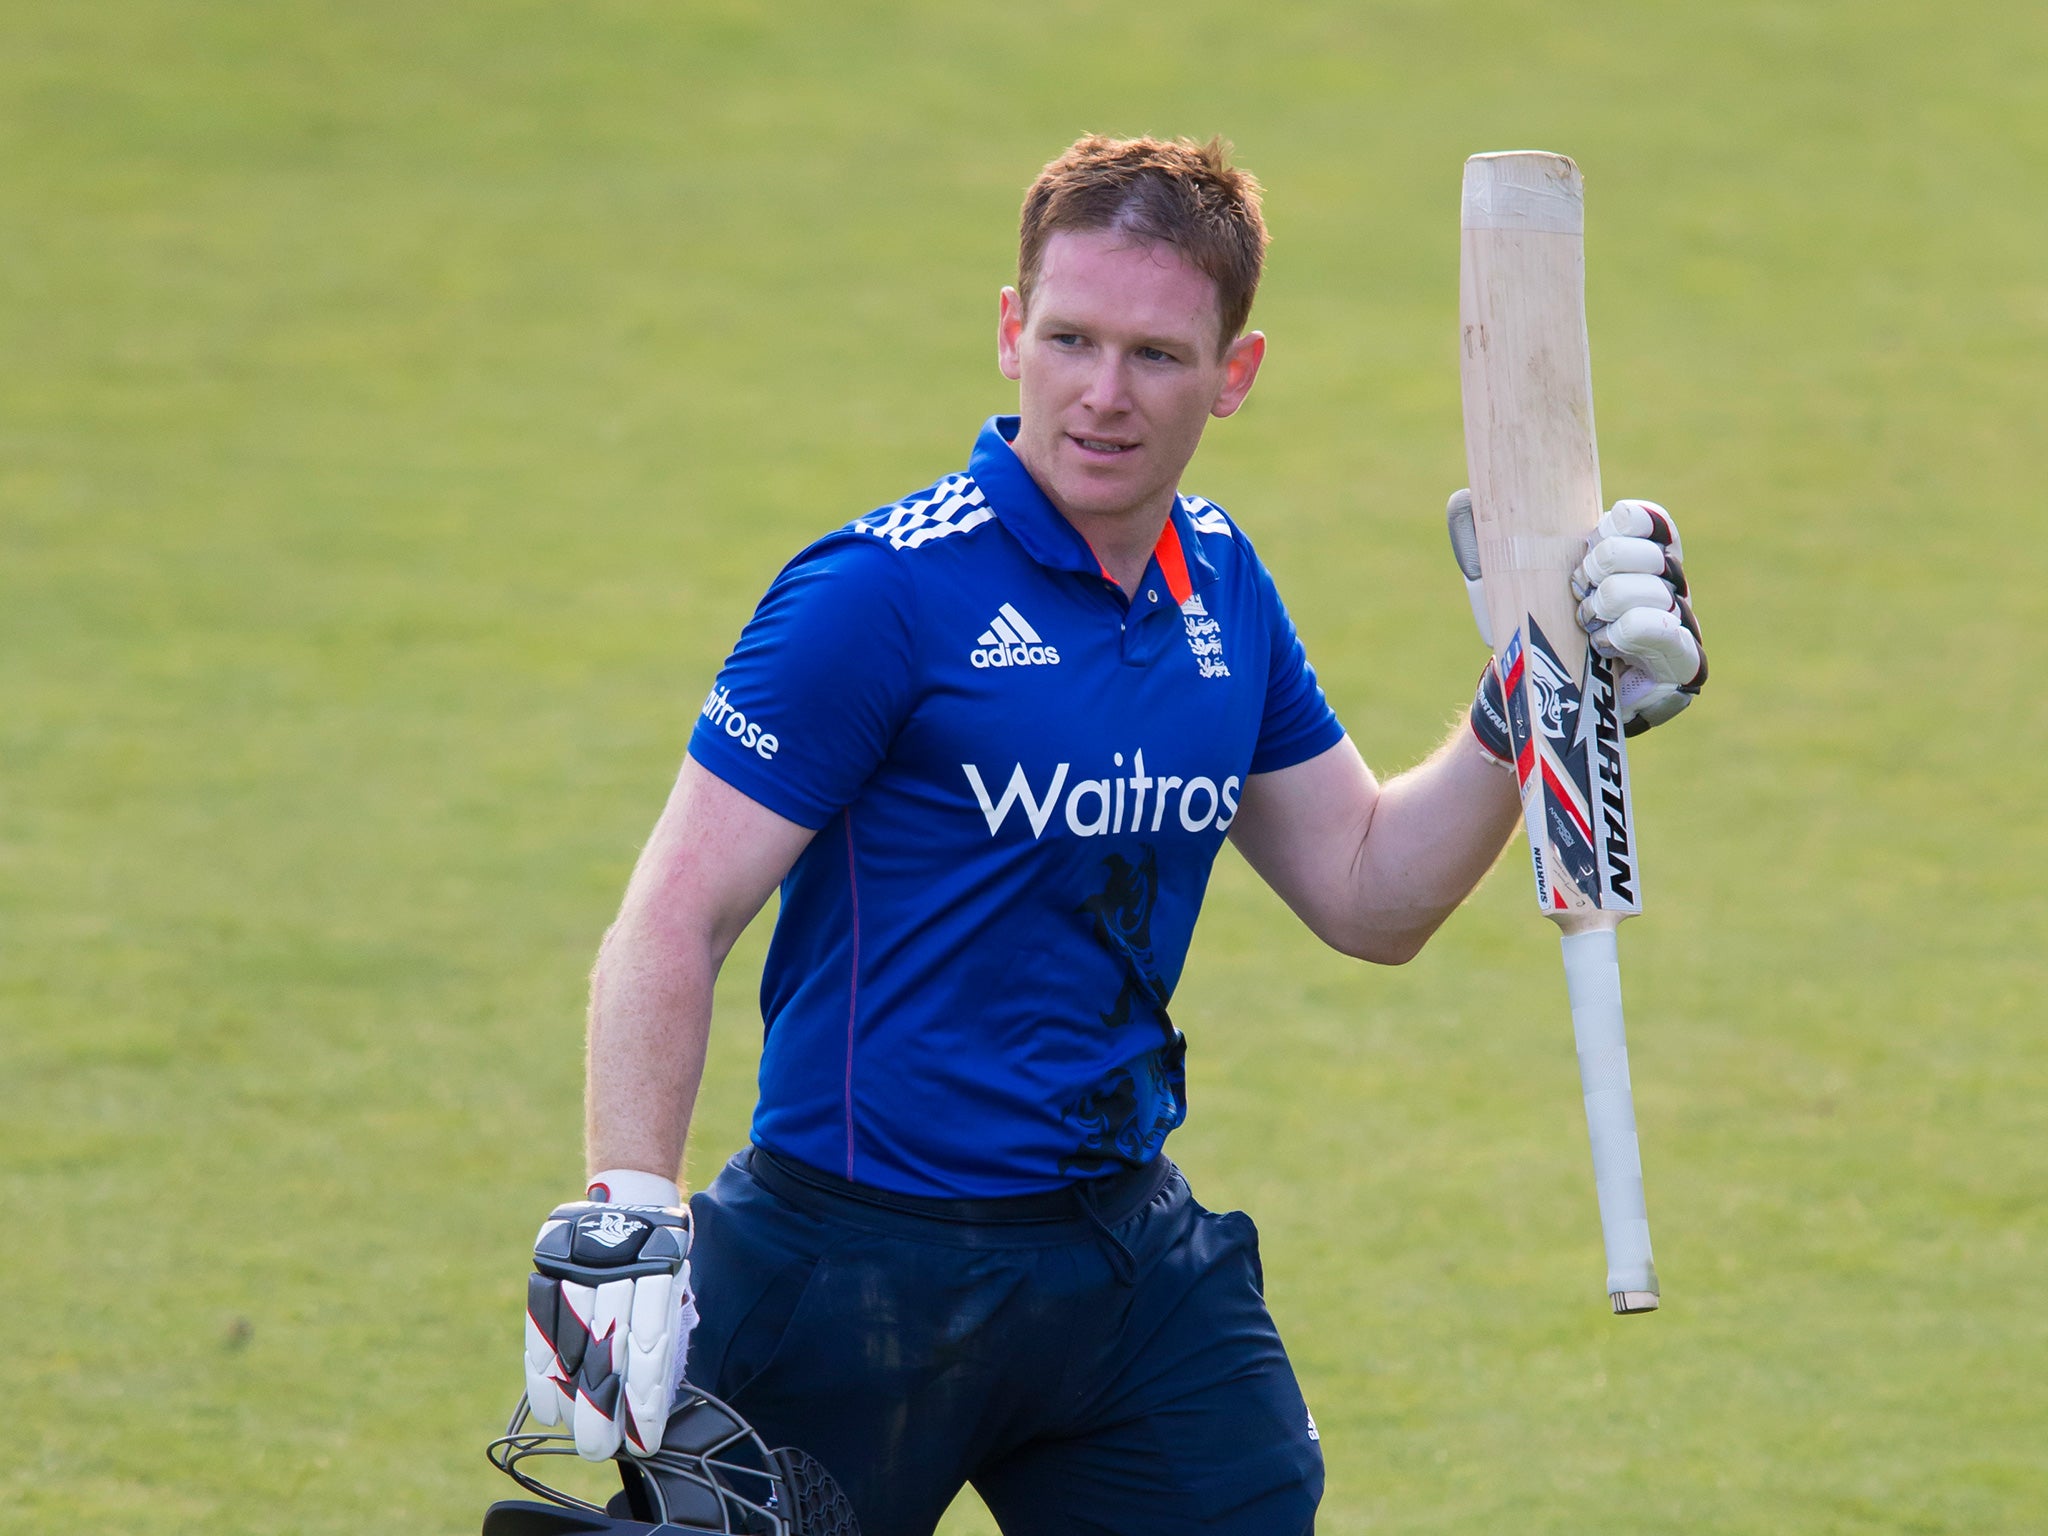 England captain Eoin Morgan produced a beautifully controlled innings of 92 yesterday